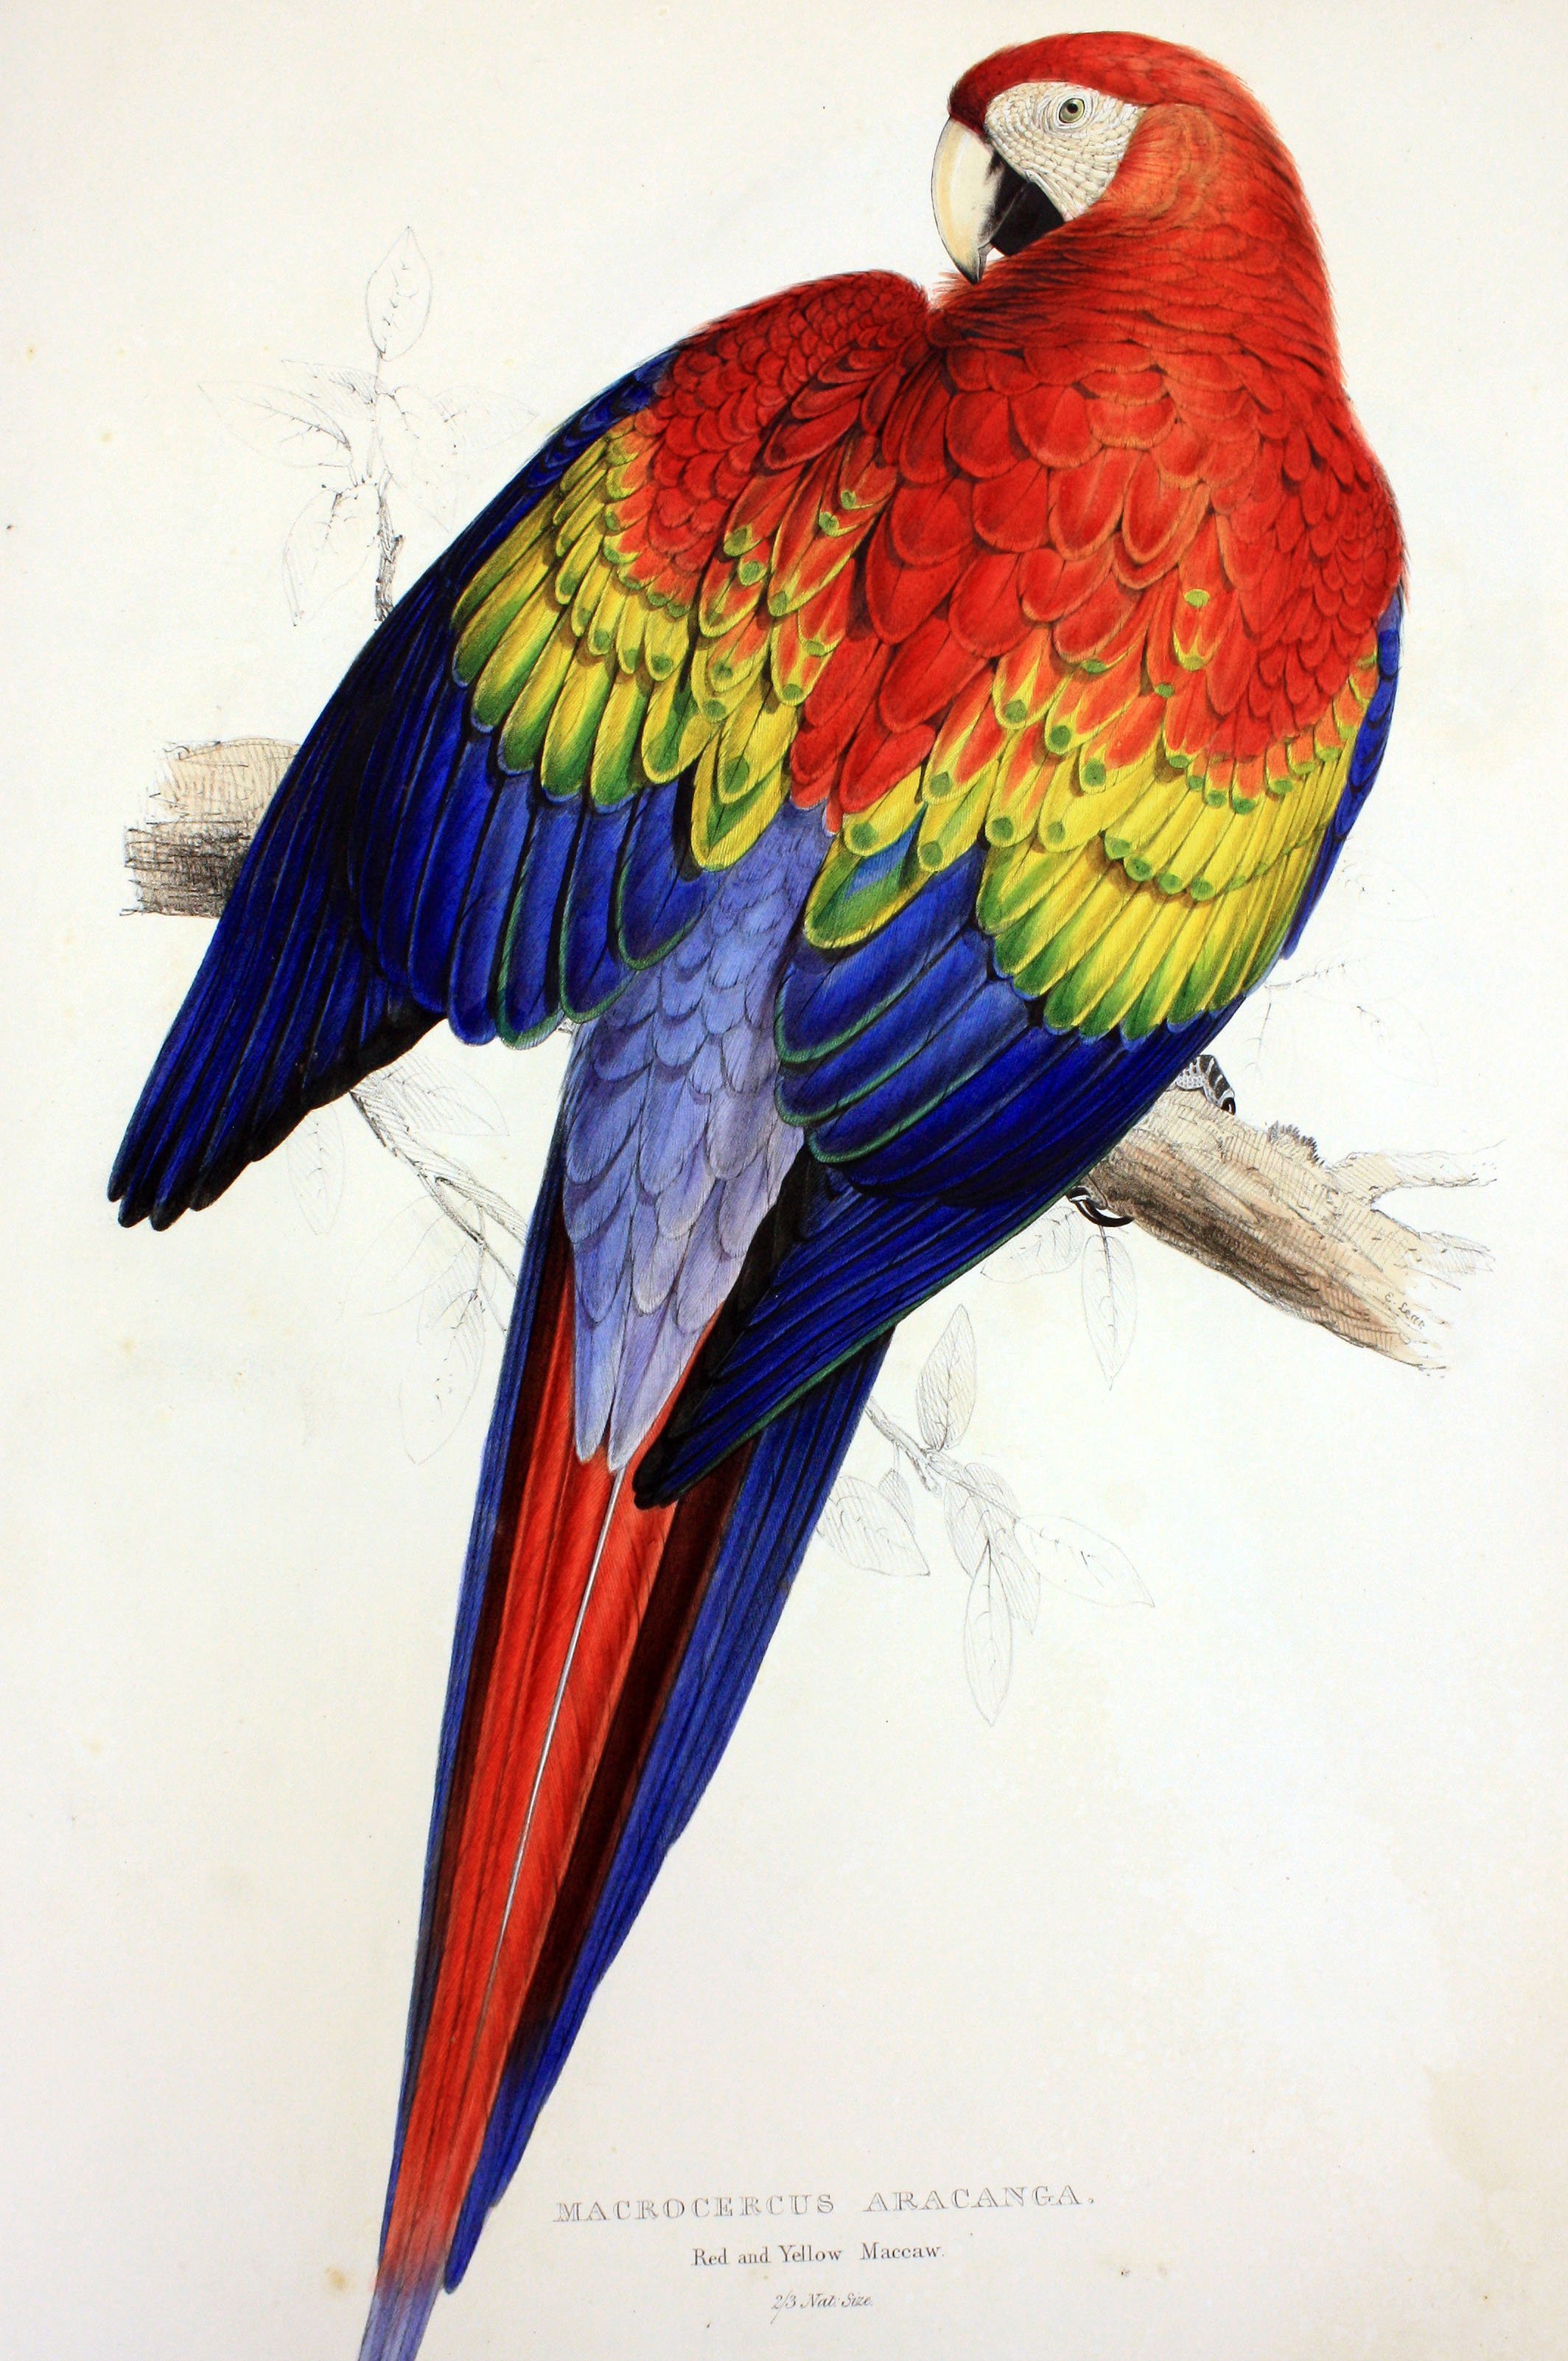 Watercolour painting of a parrot with bright red, yellow, green and blue feathers.